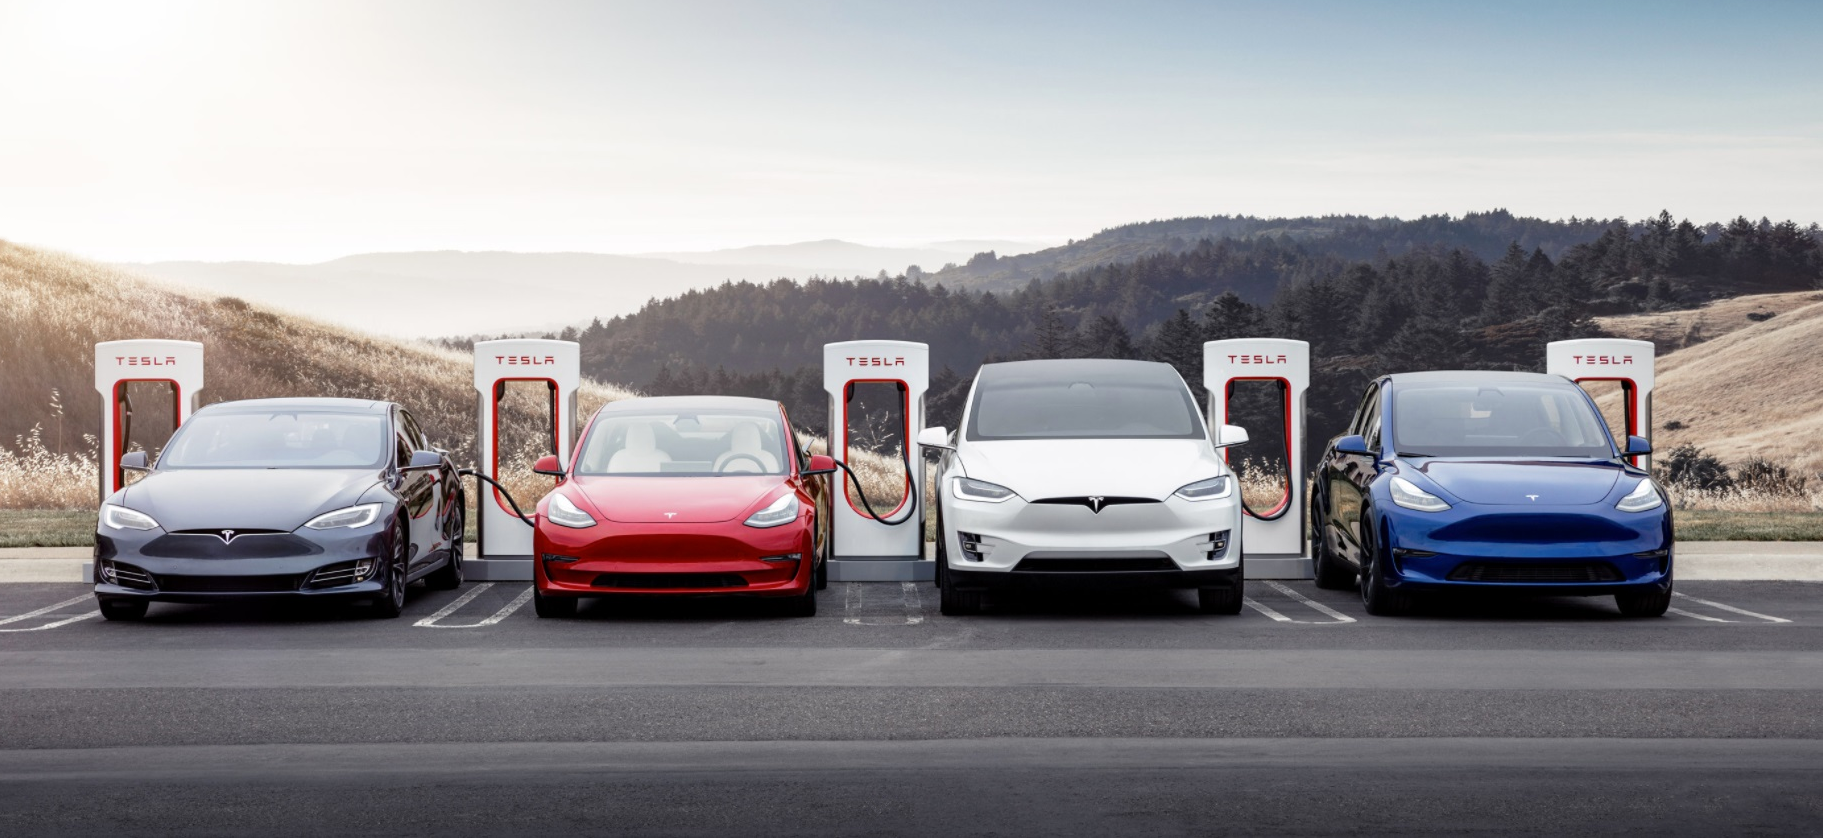 Tesla is looking of applicants in the Vancouver and Toronto area To Host Superchargers